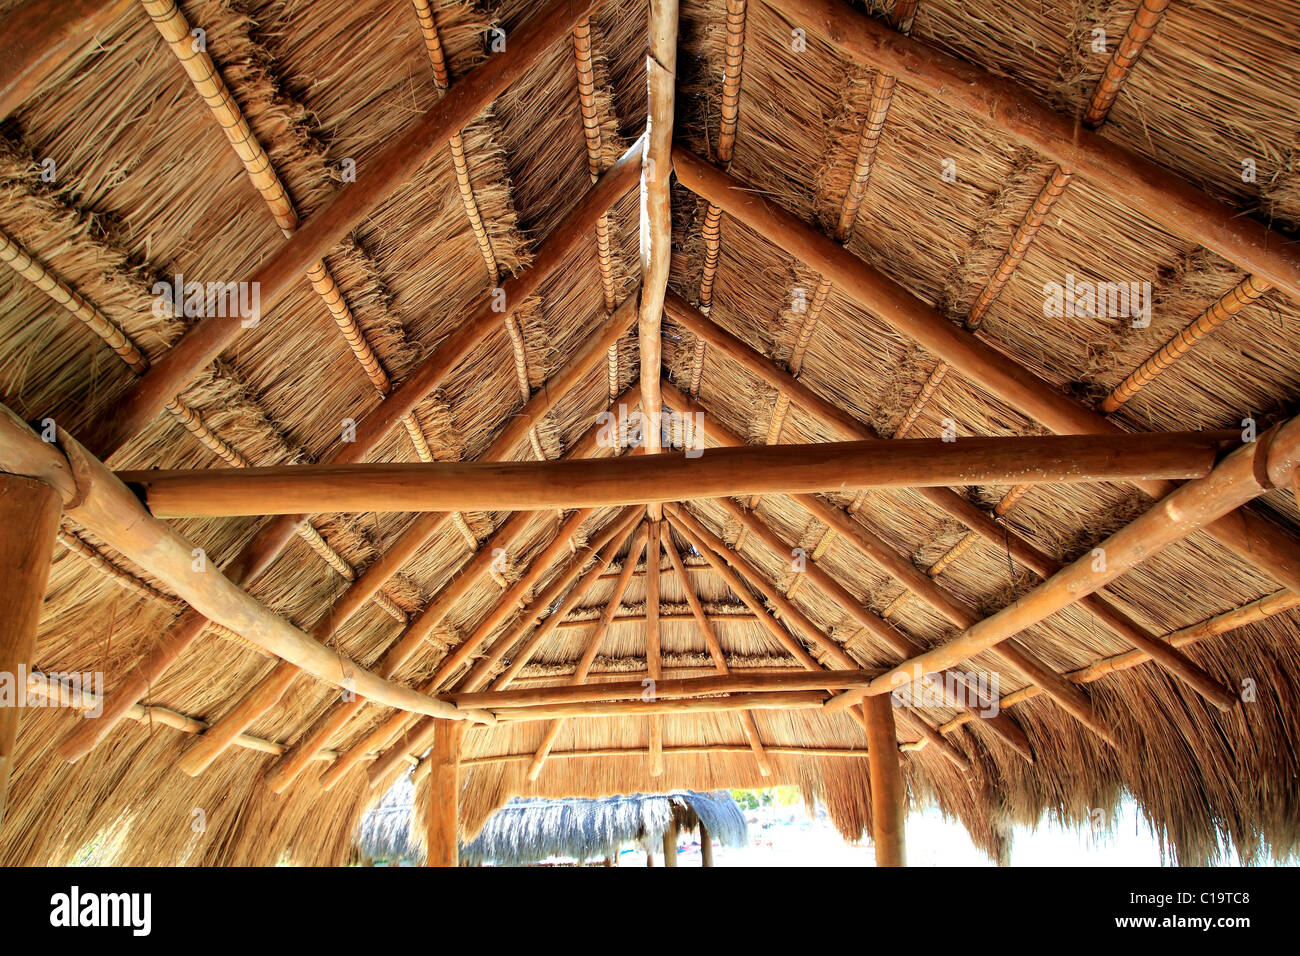 Caribbean wooden sun roof Palapa in mexico Stock Photo